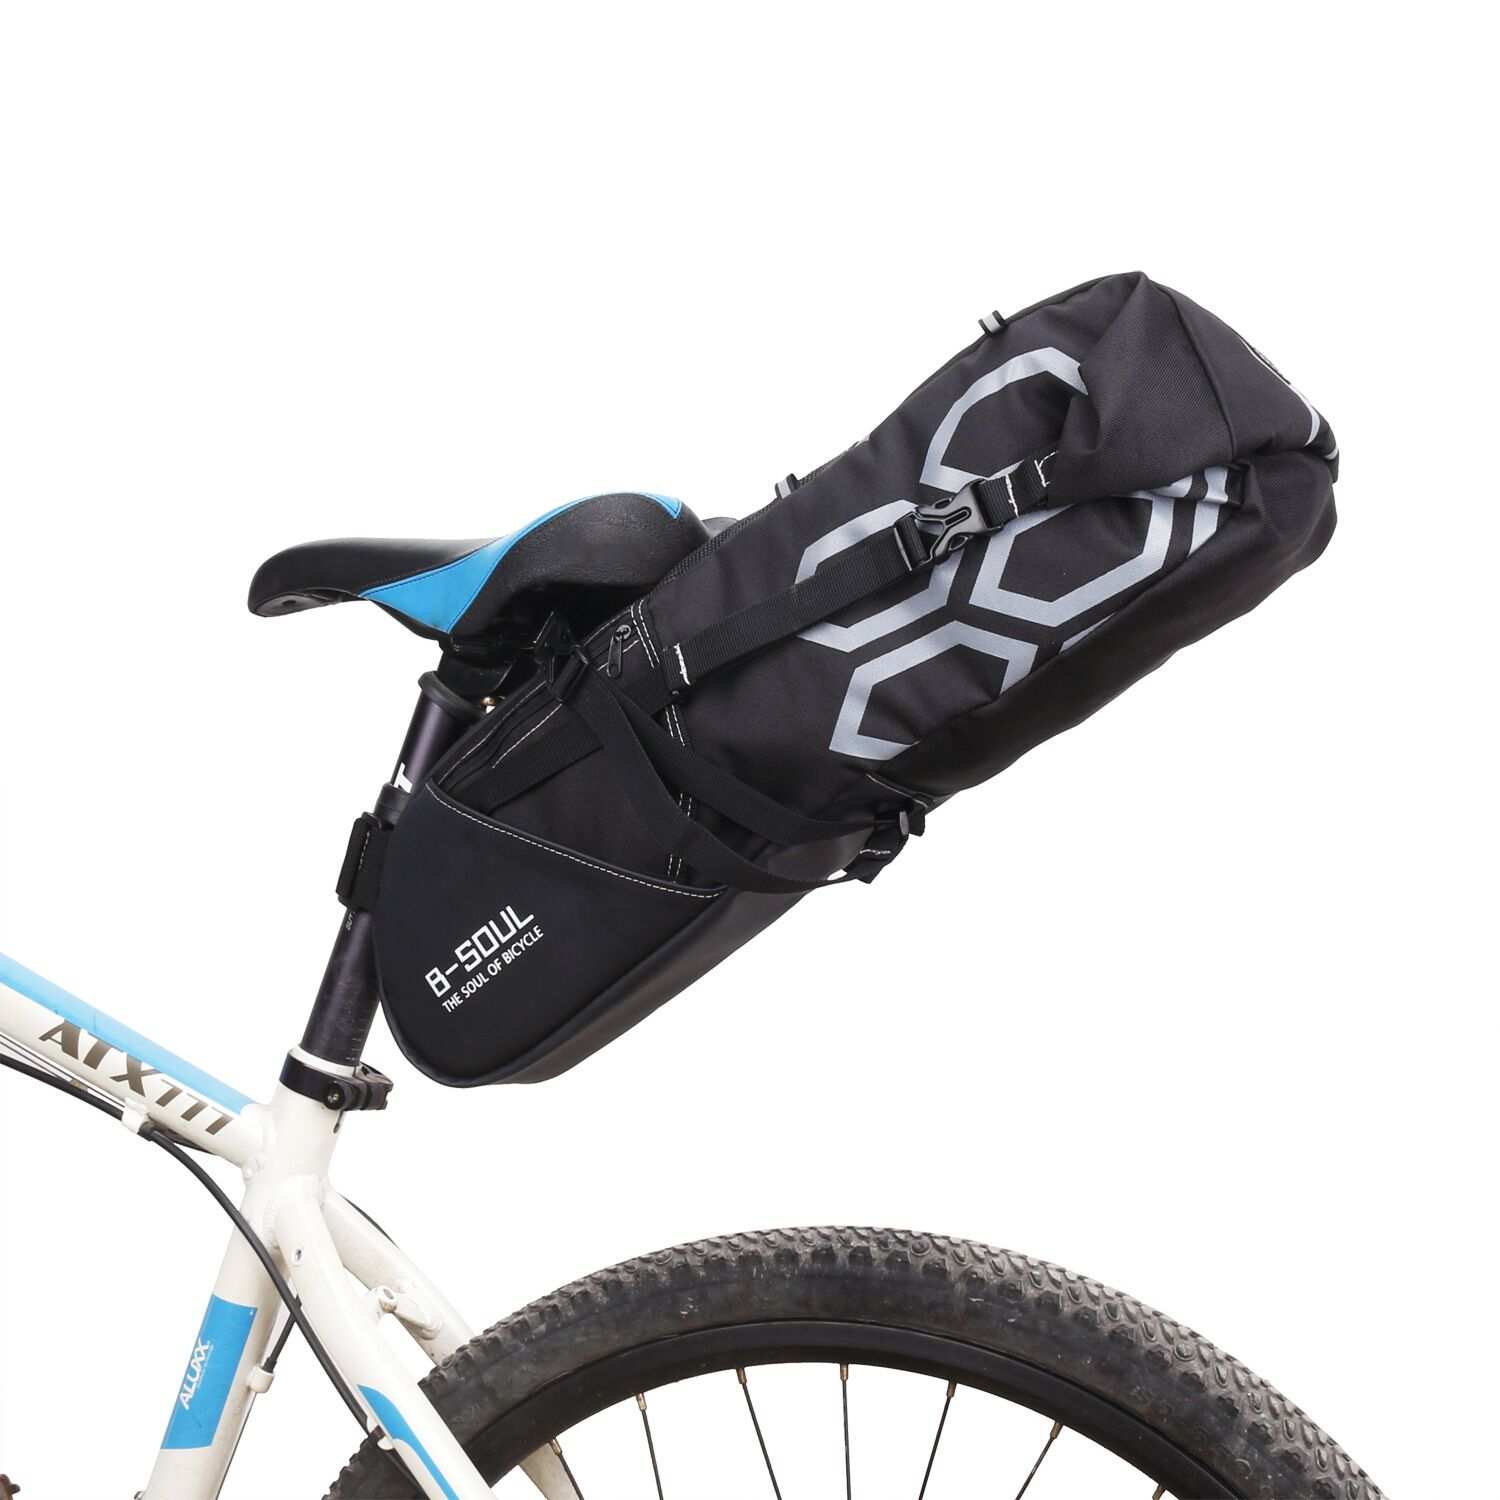 Introducing our 12L Waterproof Bicycle Saddle Bag: Road & Mountain Cycling Essential! - Bicycle bag - 1